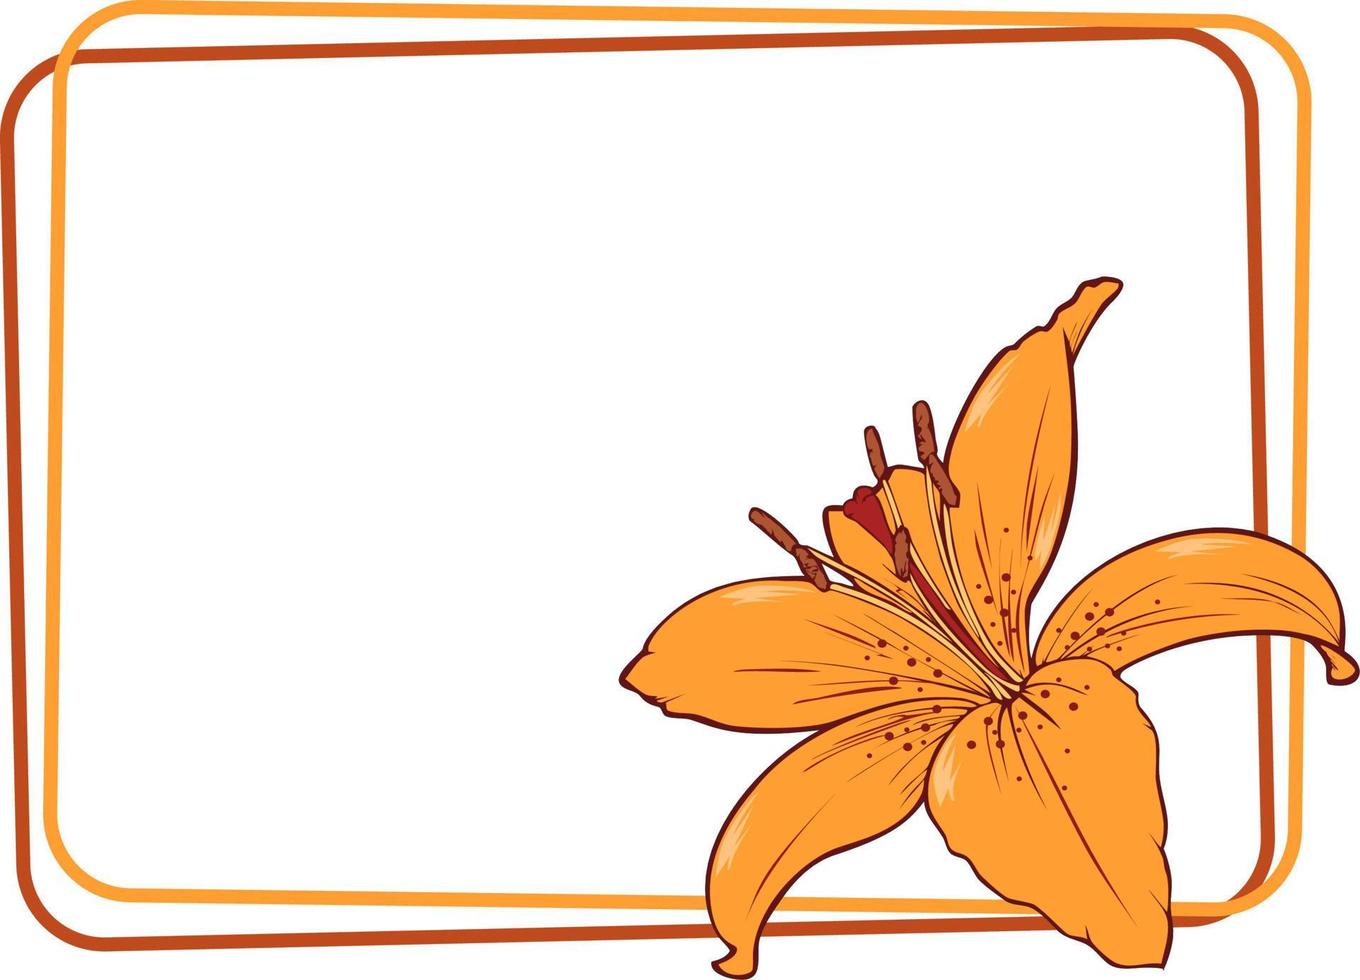 Rectangular invitation card, greeting card, orange lily on a transparent background with an empty space for the text. Vector illustration.